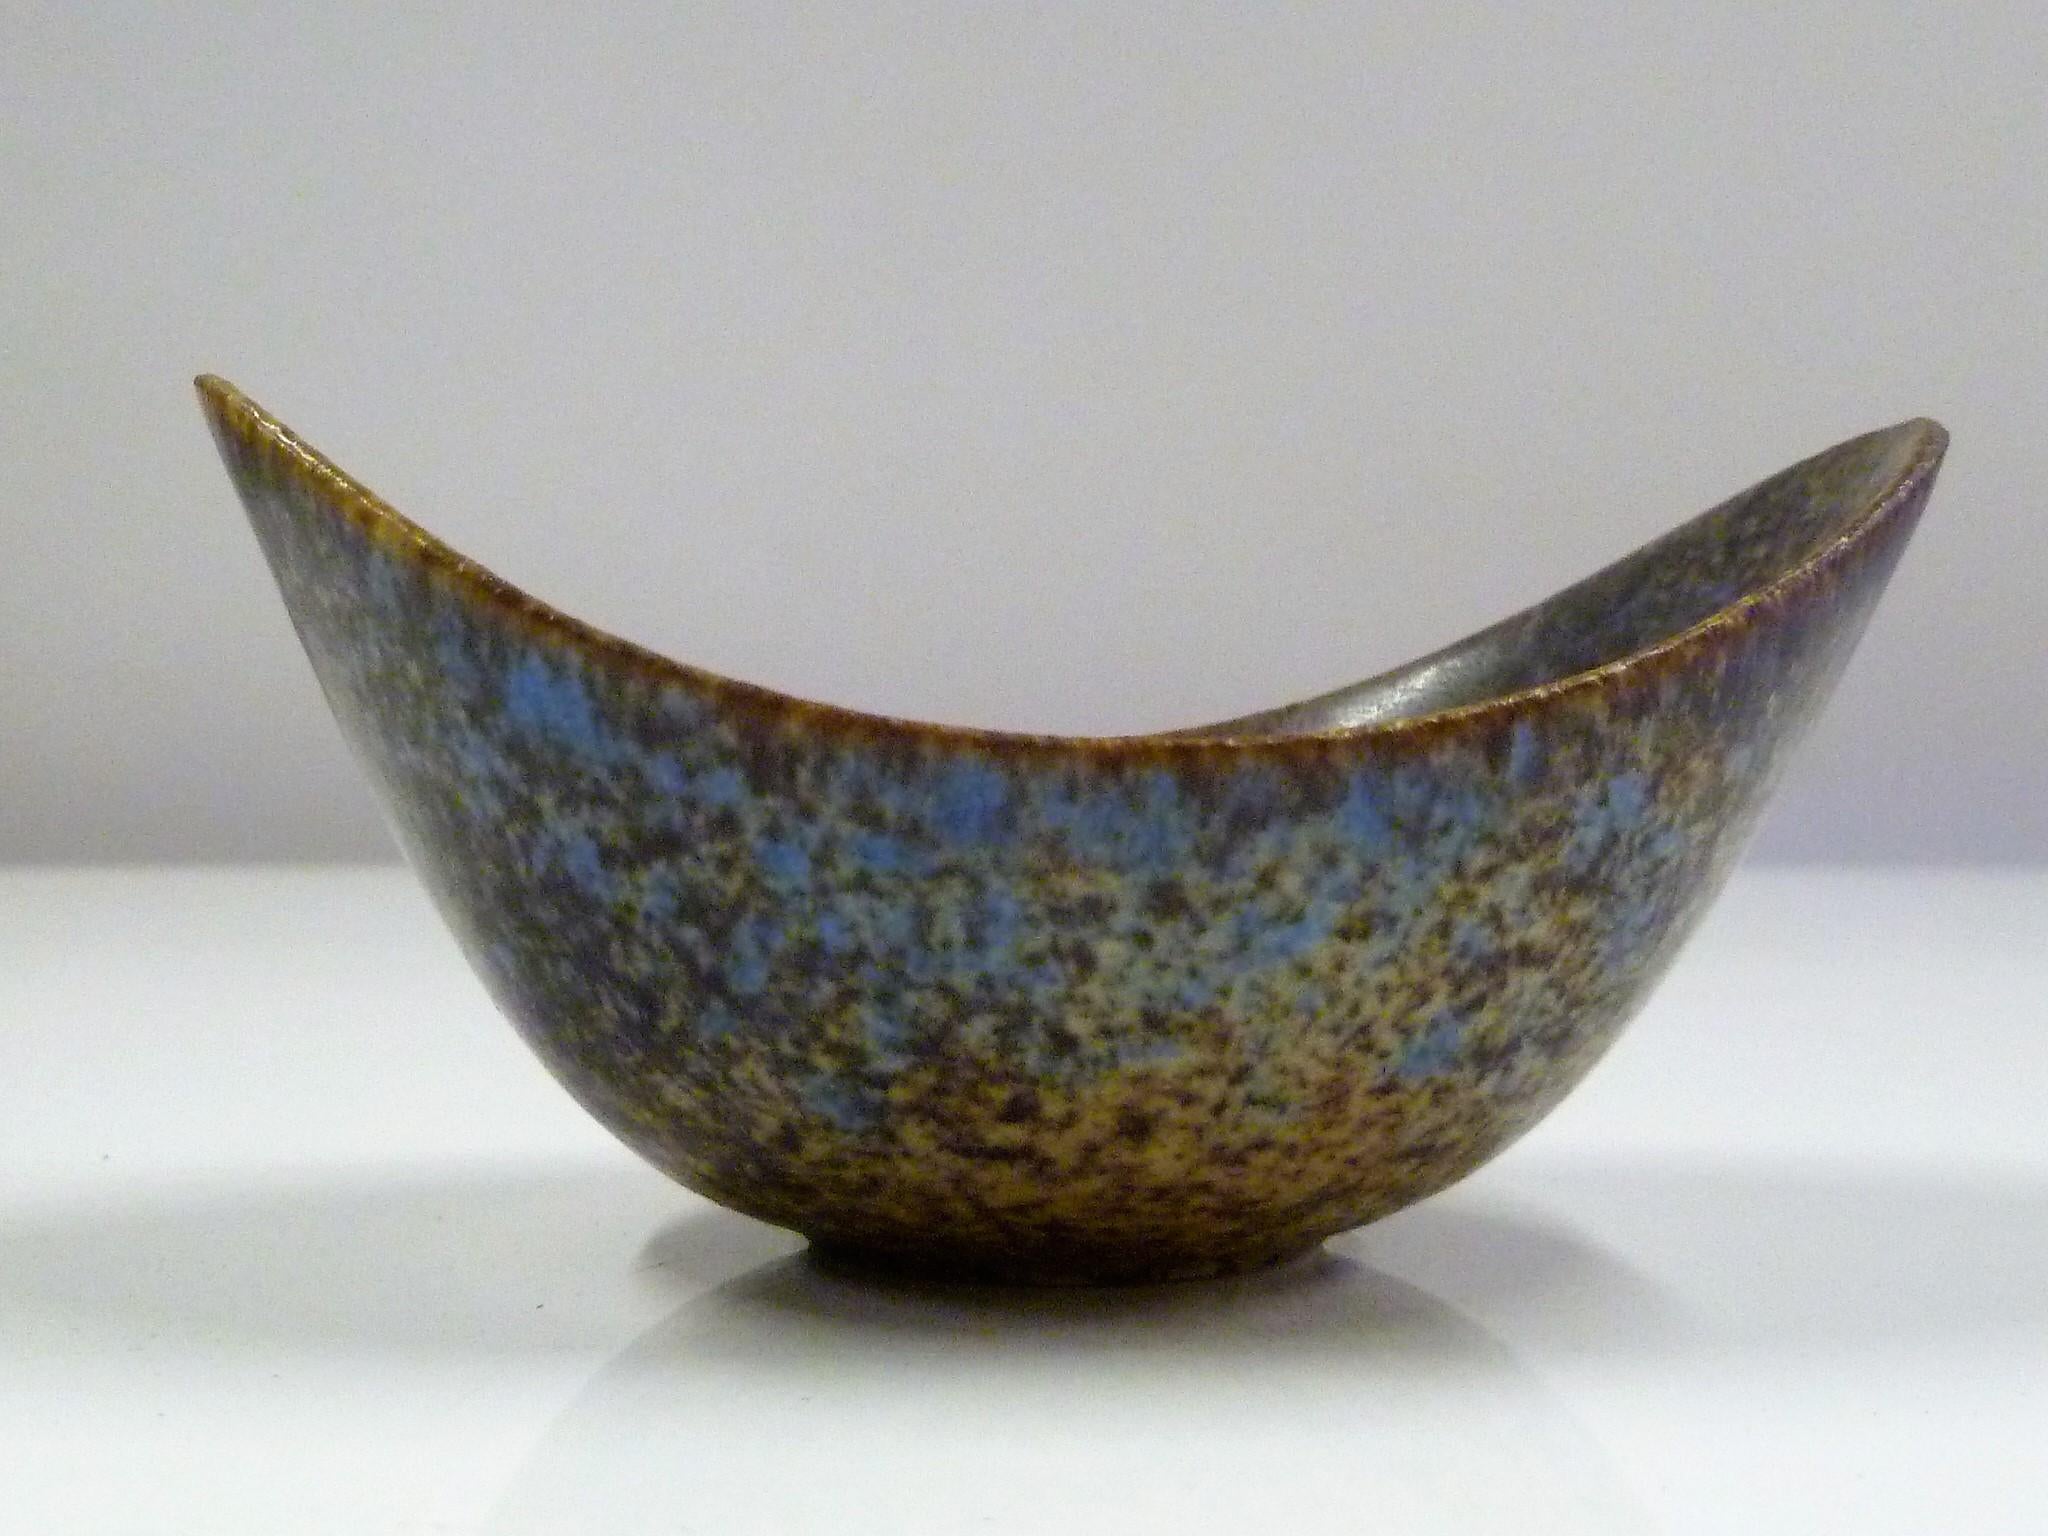 Created by Gunnard Nylund for Rorstrand, Sweden, Mid-Century Modern stoneware vessel with upturn edges. Beautiful mottled glaze in brown, blue, purple and beige colors.
Measurements: 4 in. wide, 3 in. deep, 1 in. high in center and 1 1/2 in. high